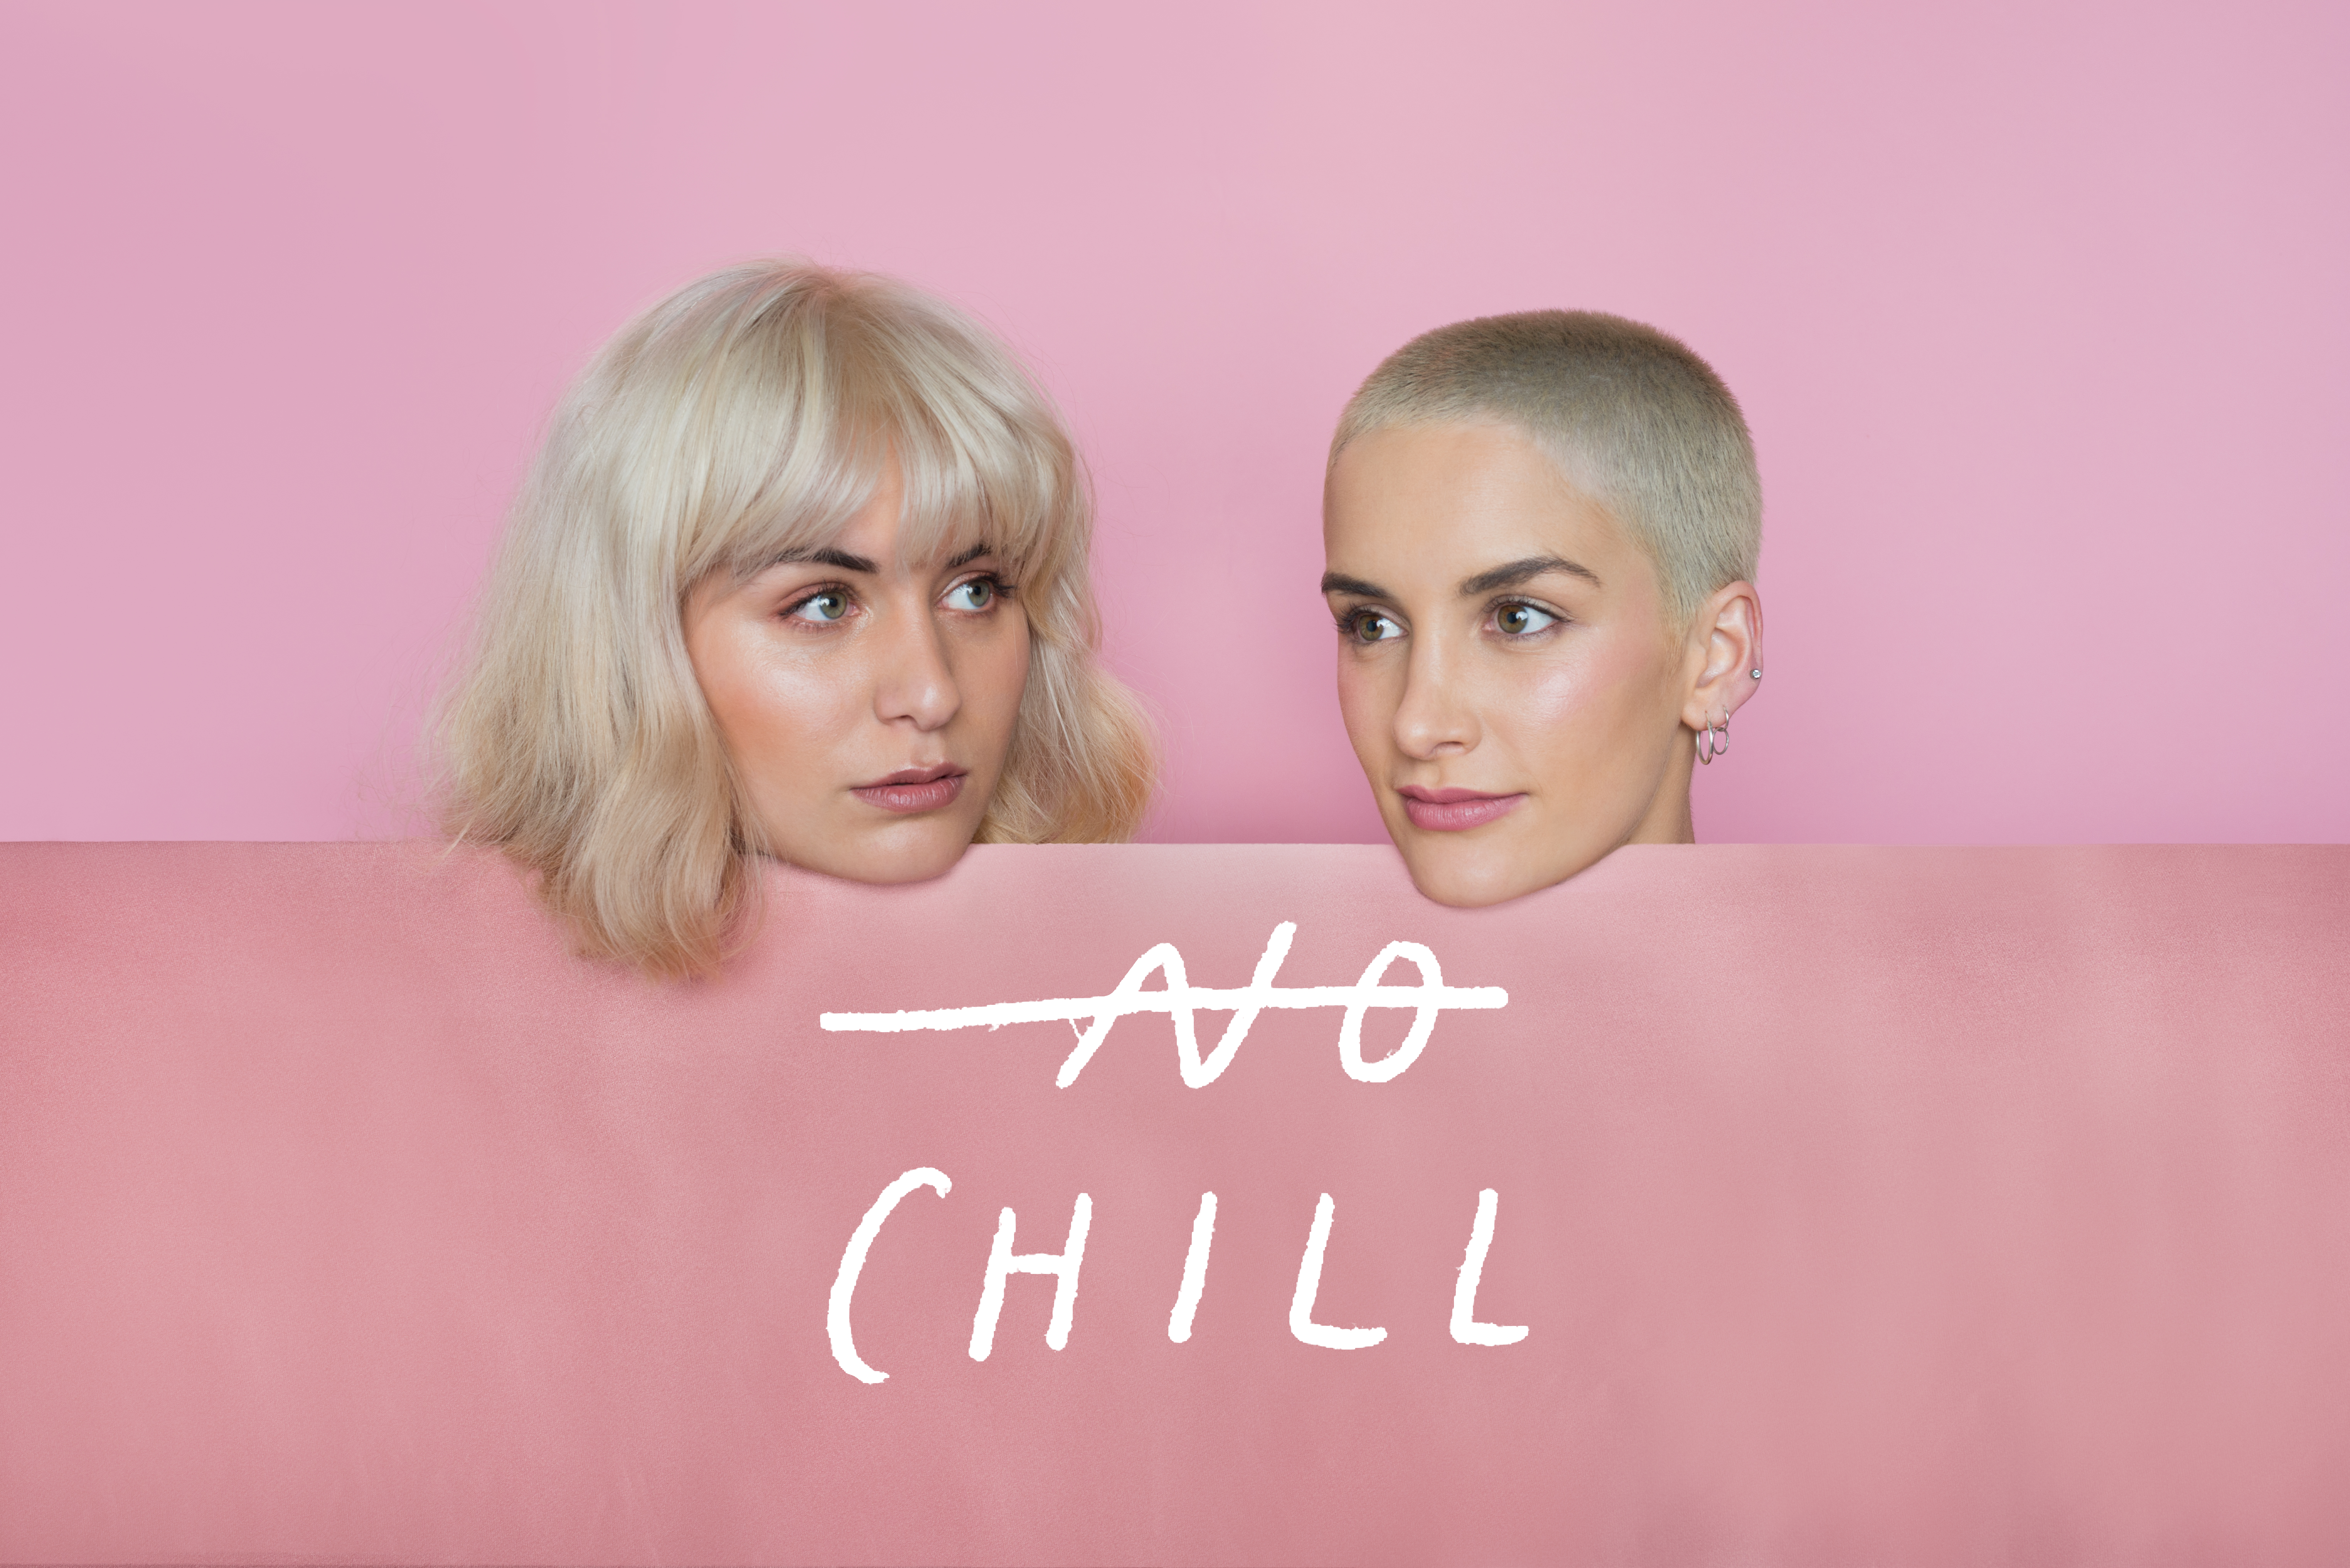 Got Absolutely No Chill? This Fresh New Mental Health Podcast Will Get You